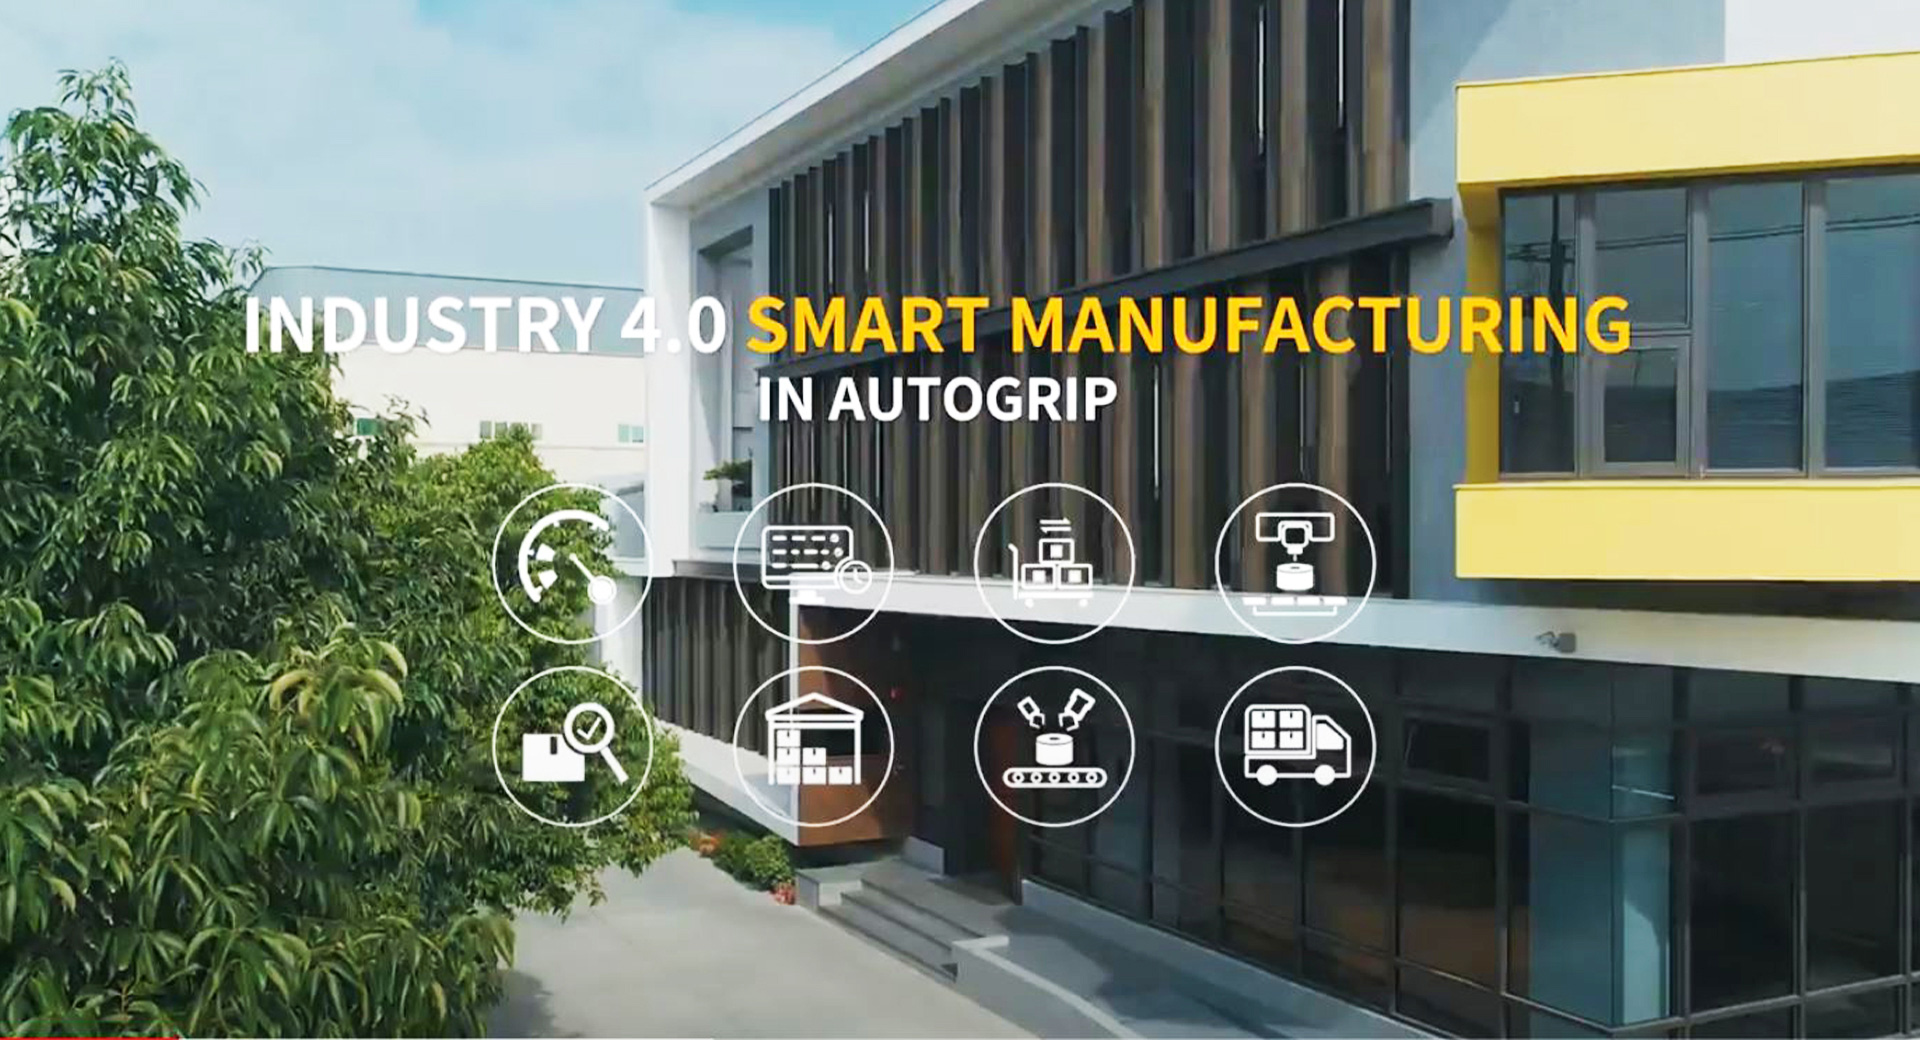 News|INDUSTRY 4.0 SMART MANUFACTURING IN AUTOGRIP